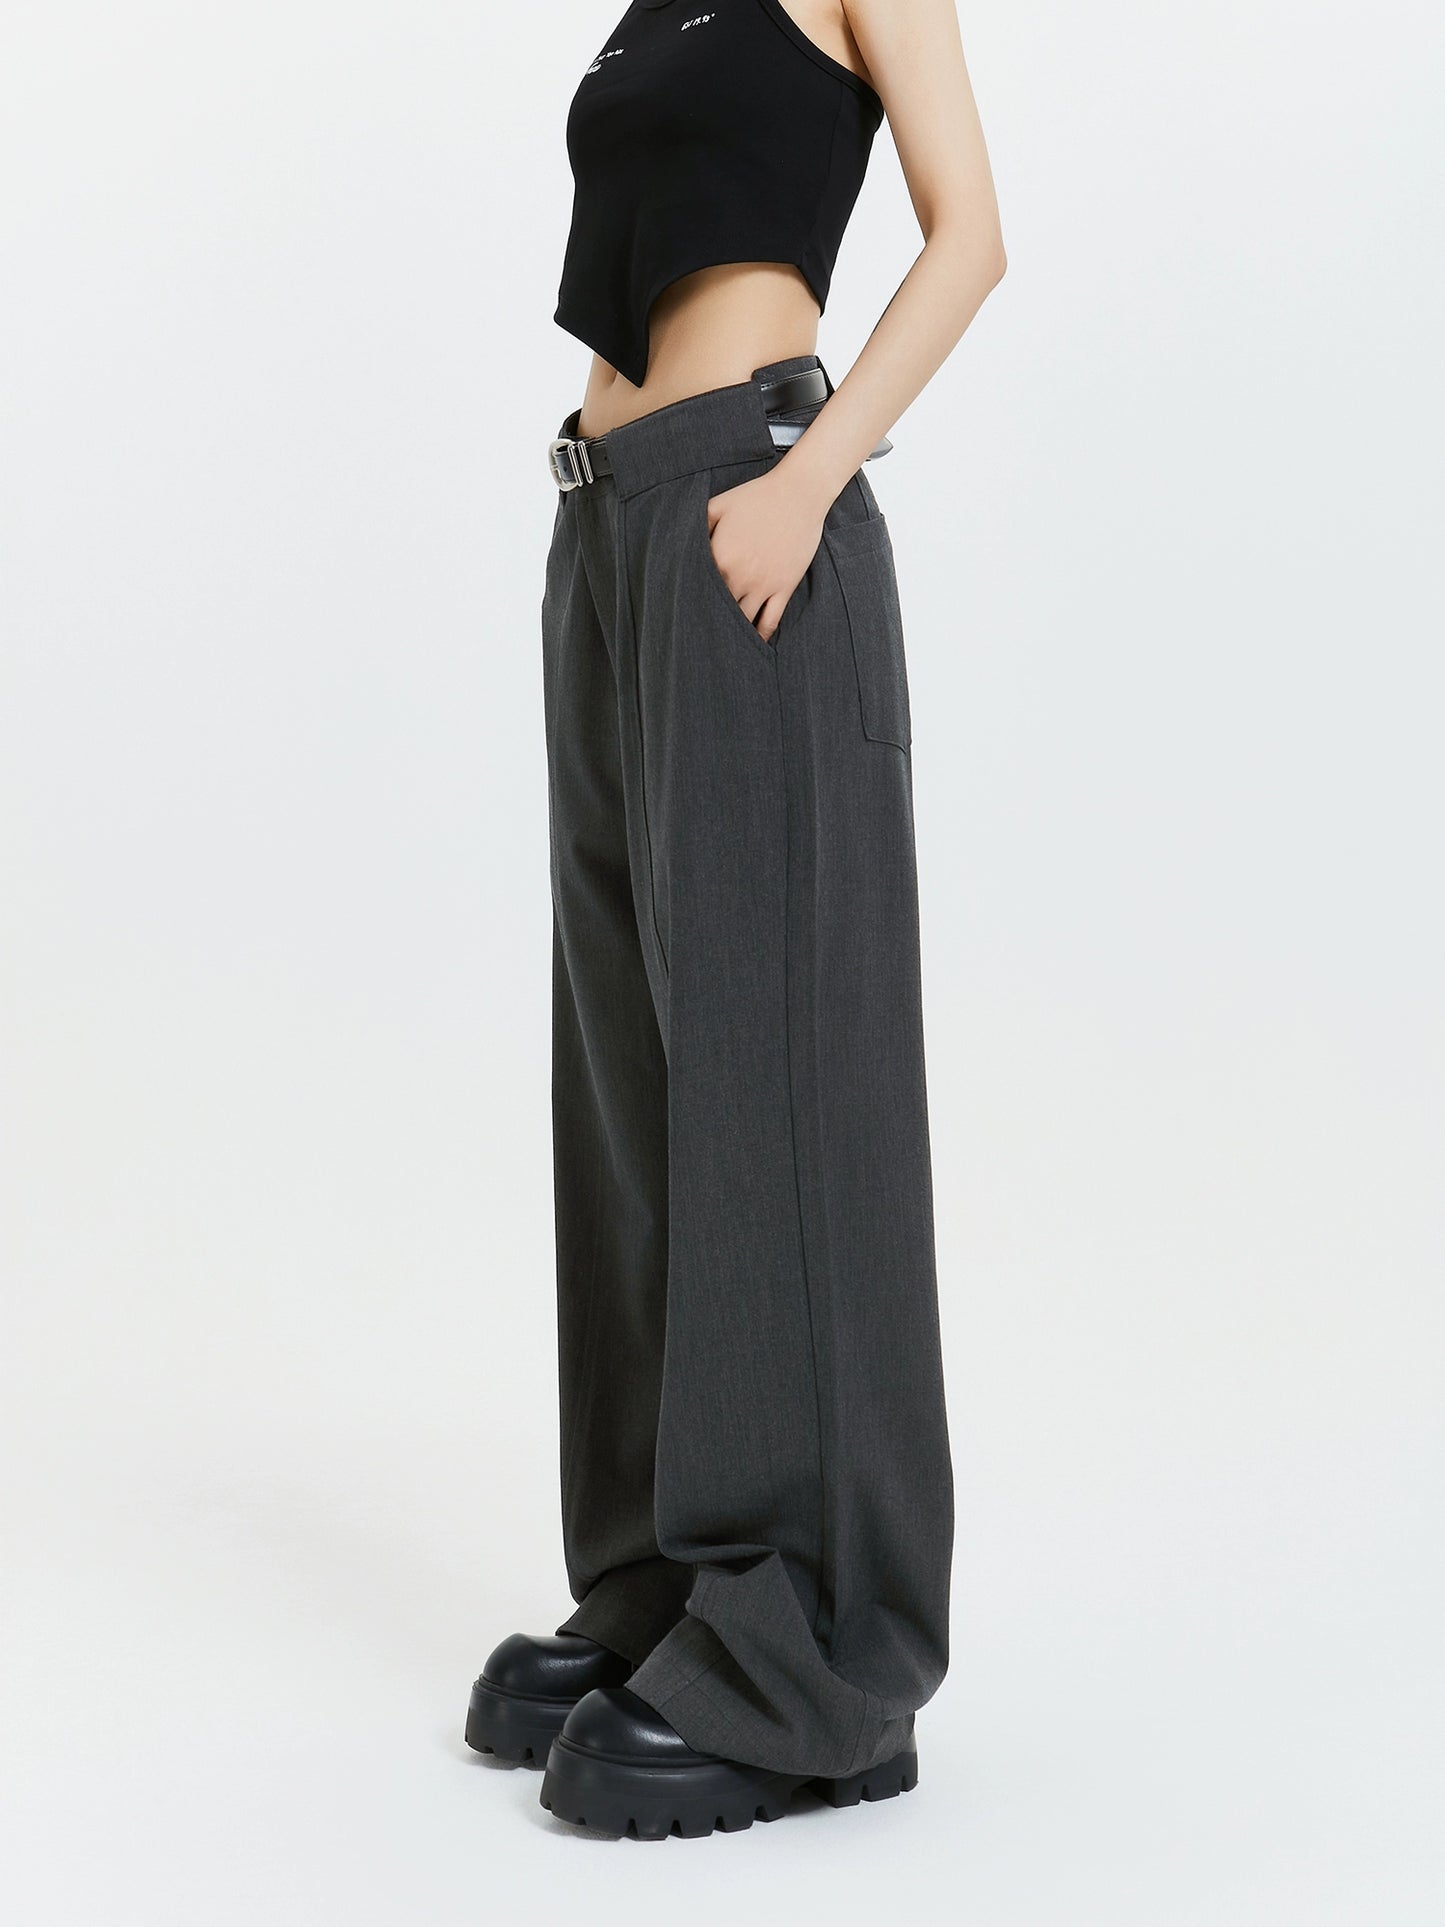 MICHINNYON commuting trendy brand new drape suit, high-end casual loose straight-leg pants, men and women are versatile